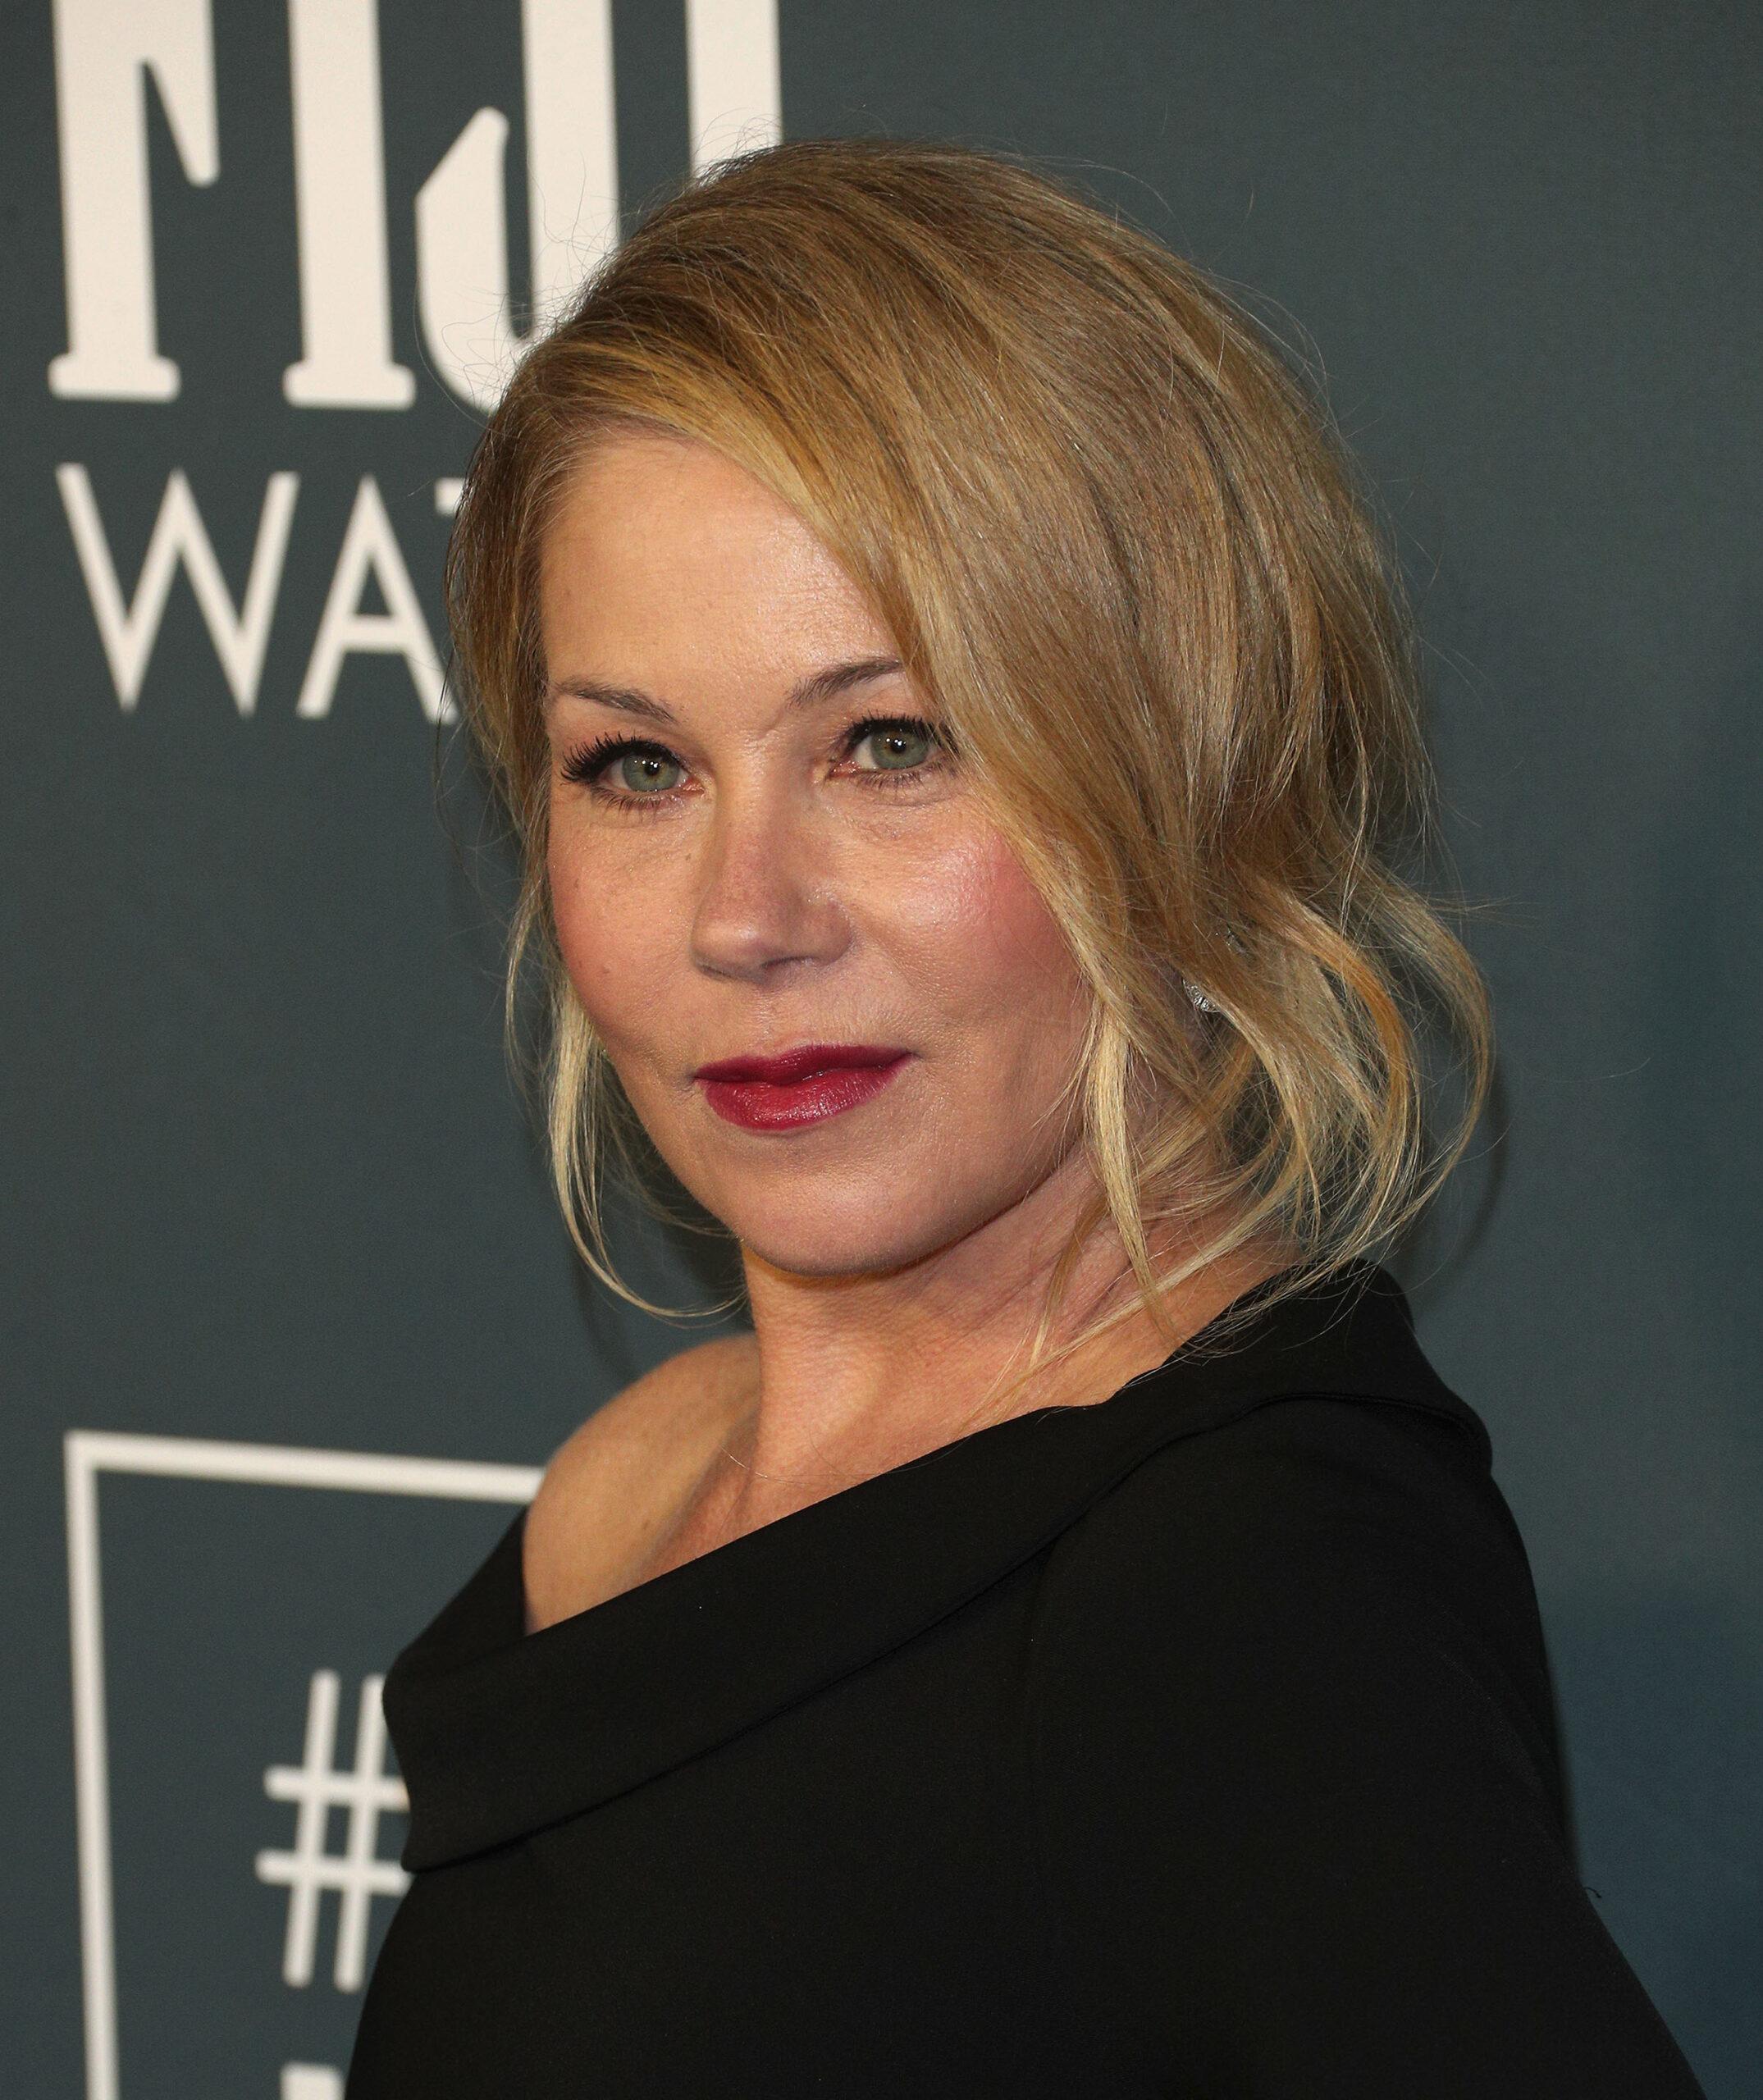 Christina Applegate at the 25th Annual Critic's Choice Awards